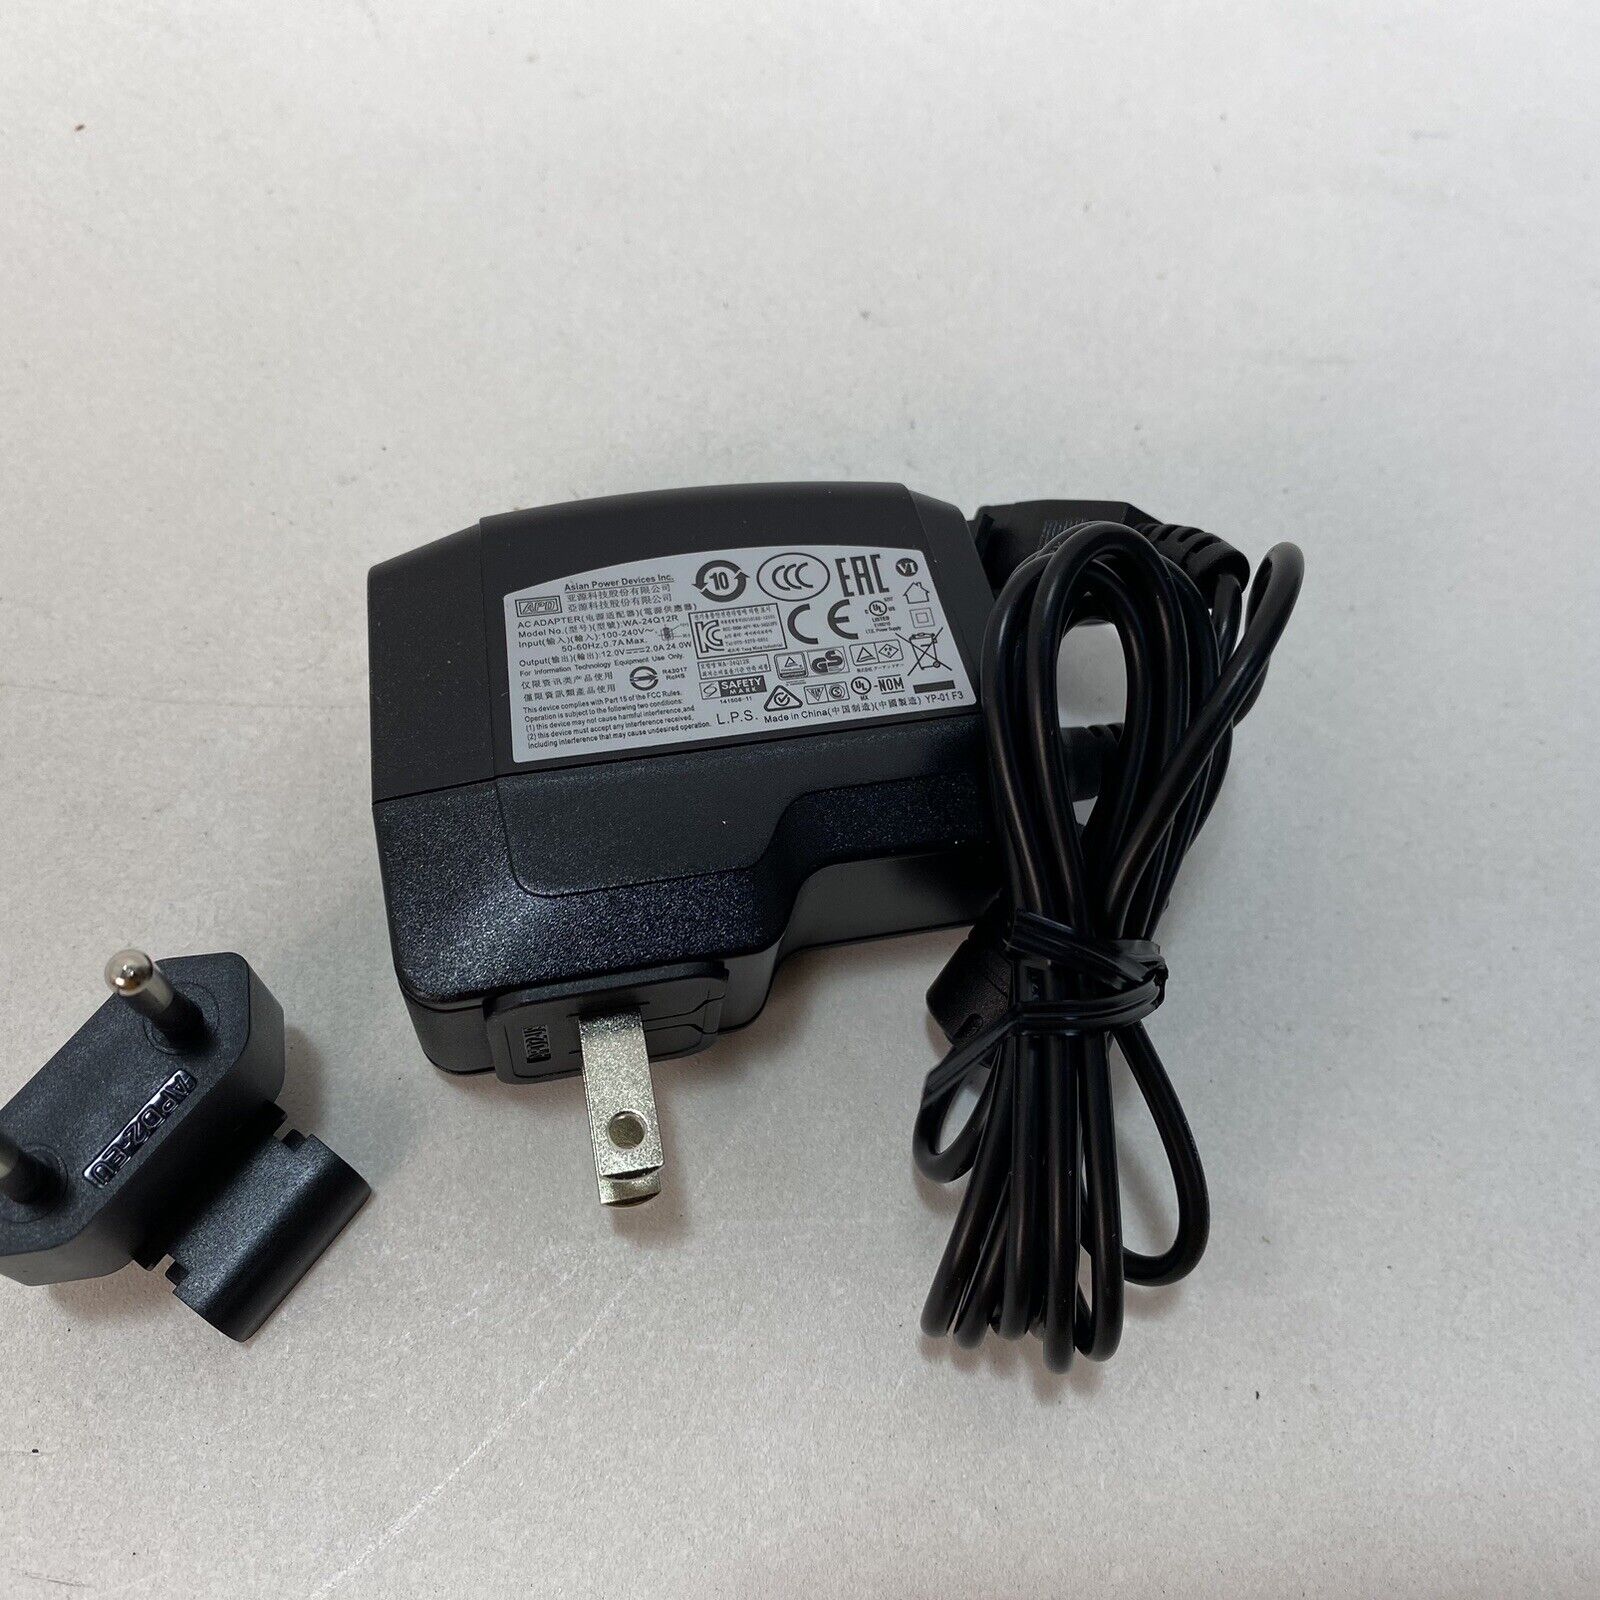 *Brand NEW* GENUINE APD WA-24Q12R 100/240V 12V 2A AC ADAPTER THIN TIP - W/ Euro Adapter Power Supply